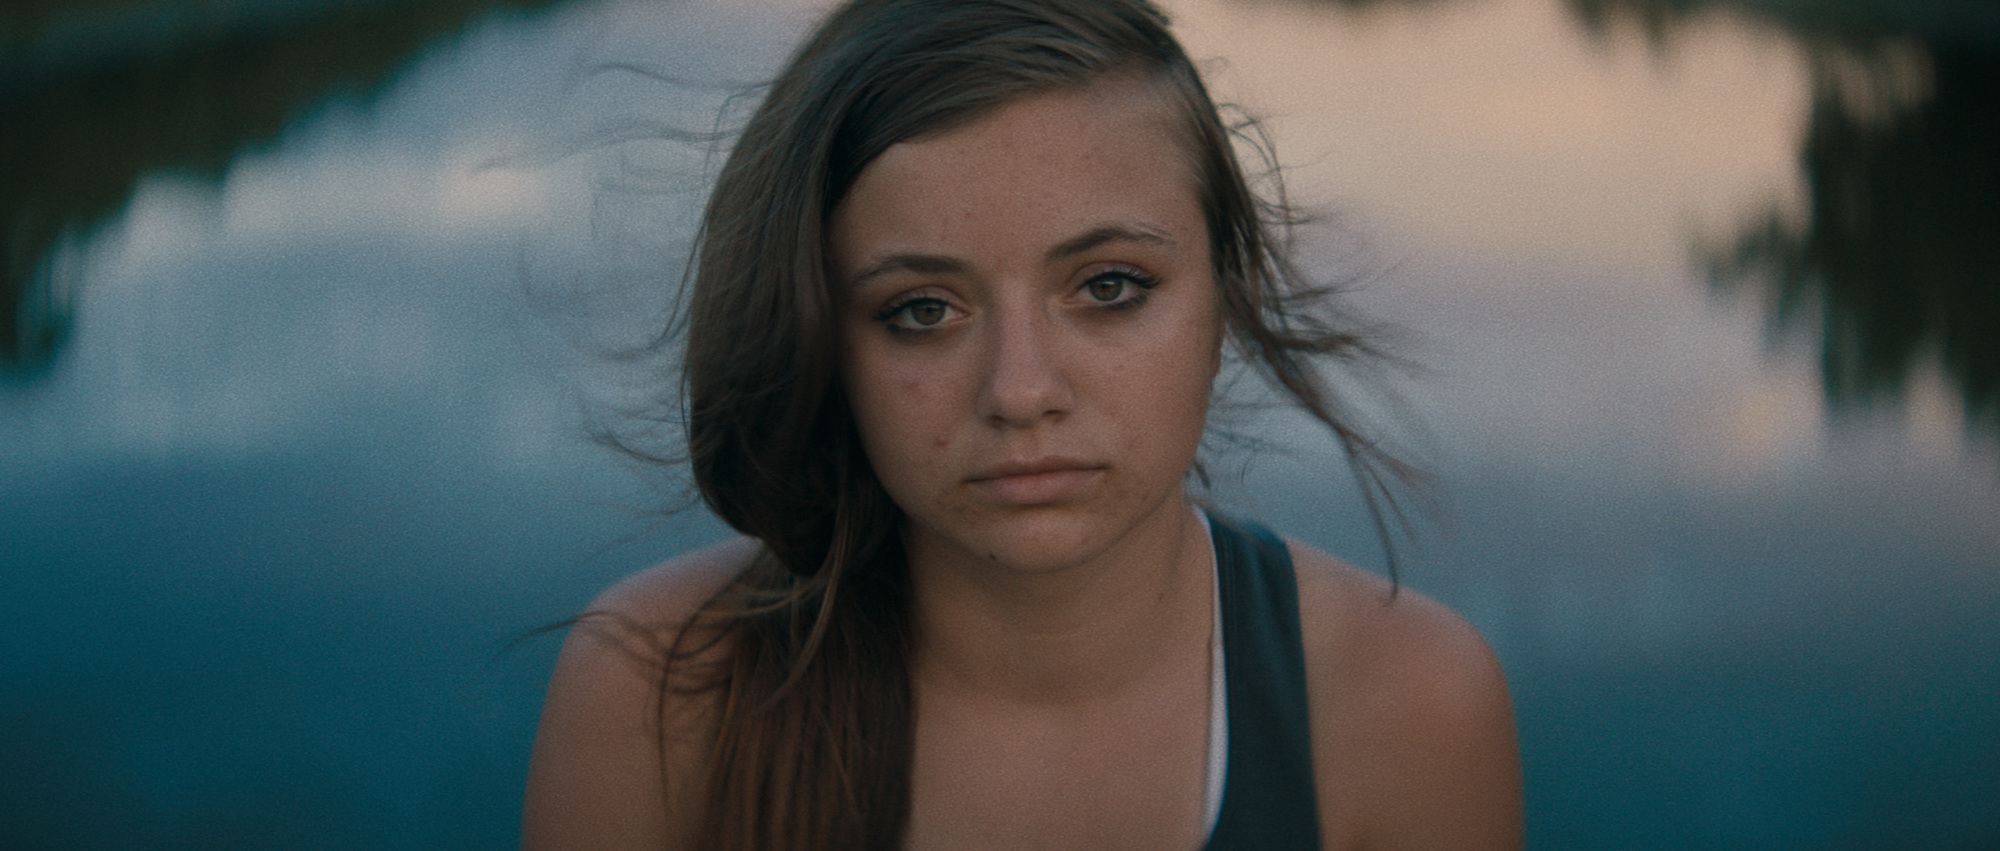 “Lowland Kids” is a documentary following the last two teens on an island. Courtesy photos